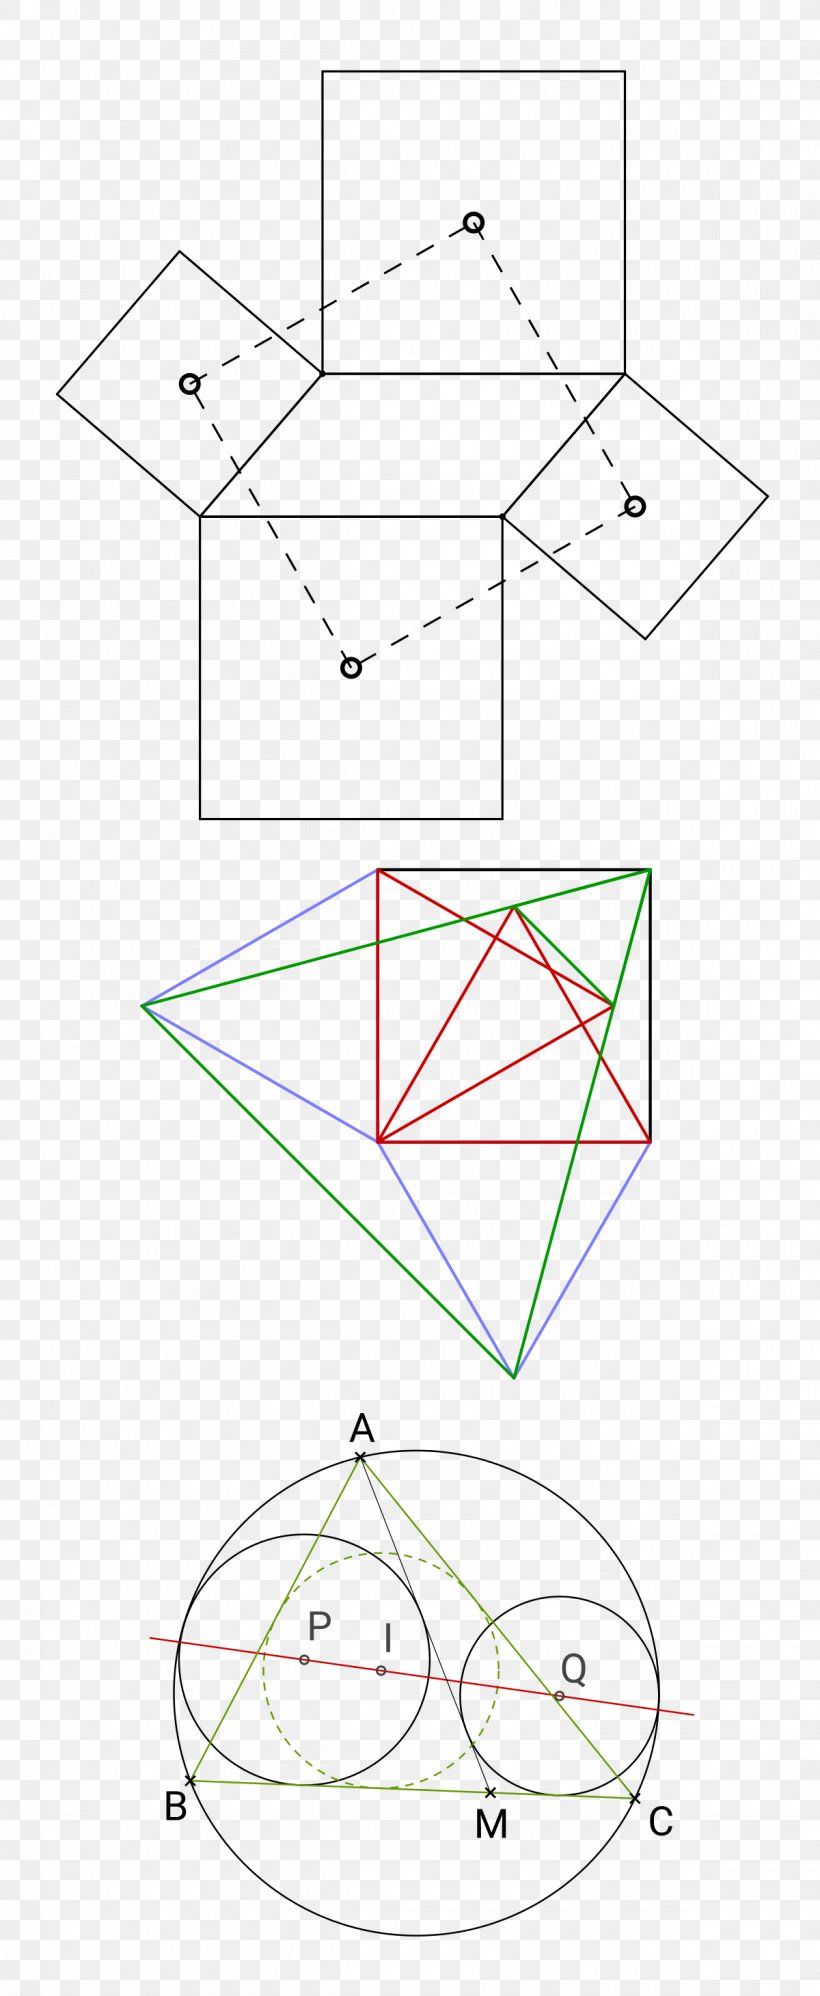 Van Aubel's Theorem Geometry Quadrilateral Japanese Theorem For Cyclic Polygons, PNG, 1200x2921px, Theorem, Area, Diagram, Drawing, Euclidean Geometry Download Free